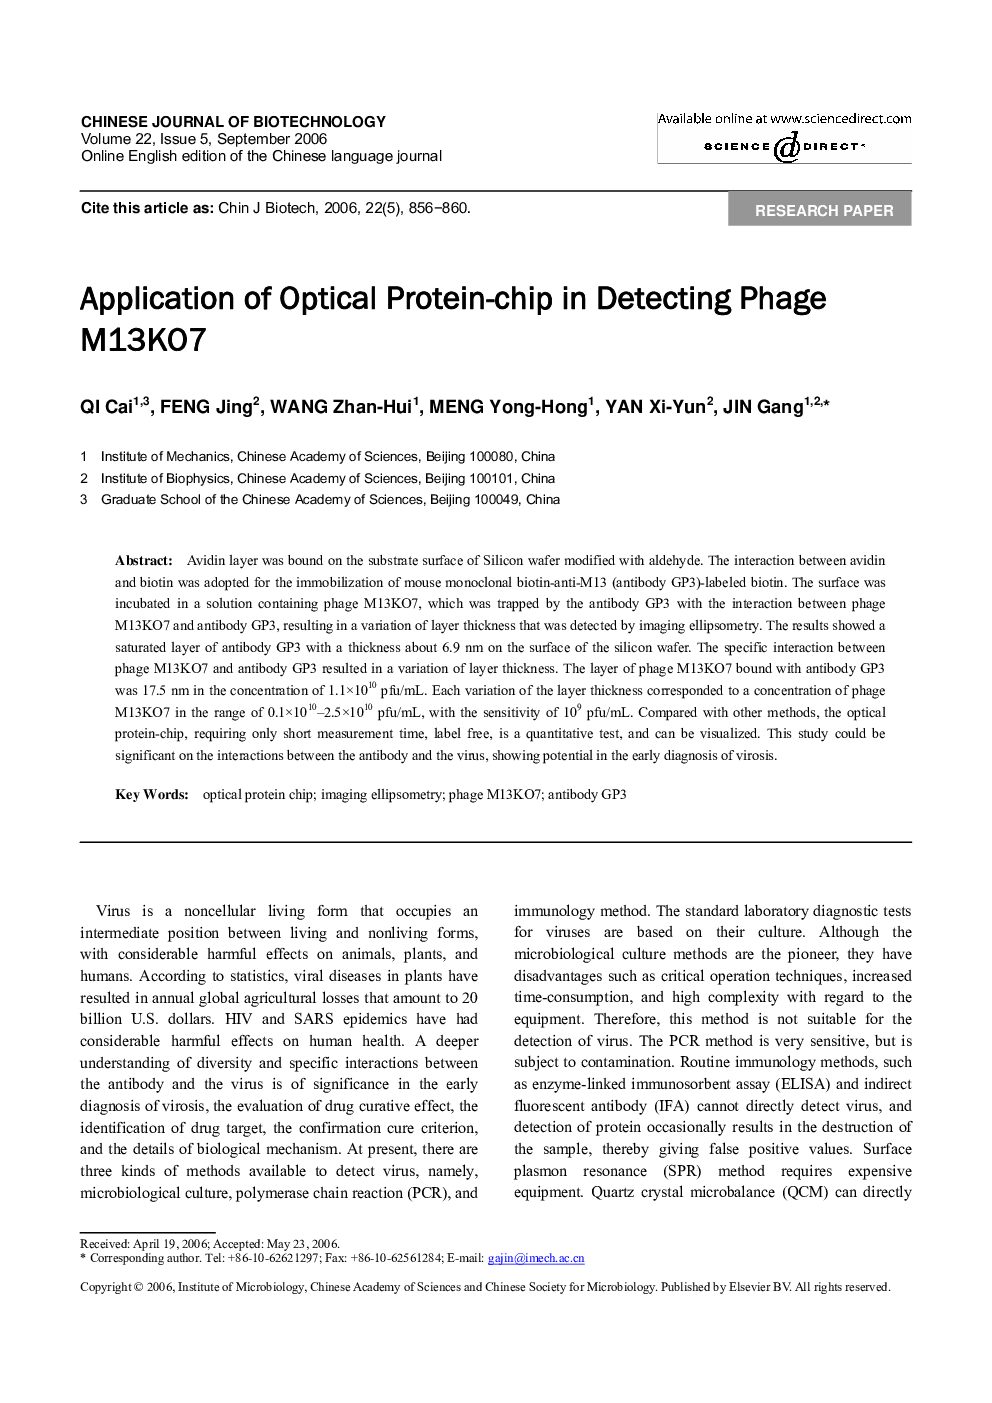 Application of Optical Protein-chip in Detecting Phage M13KO7